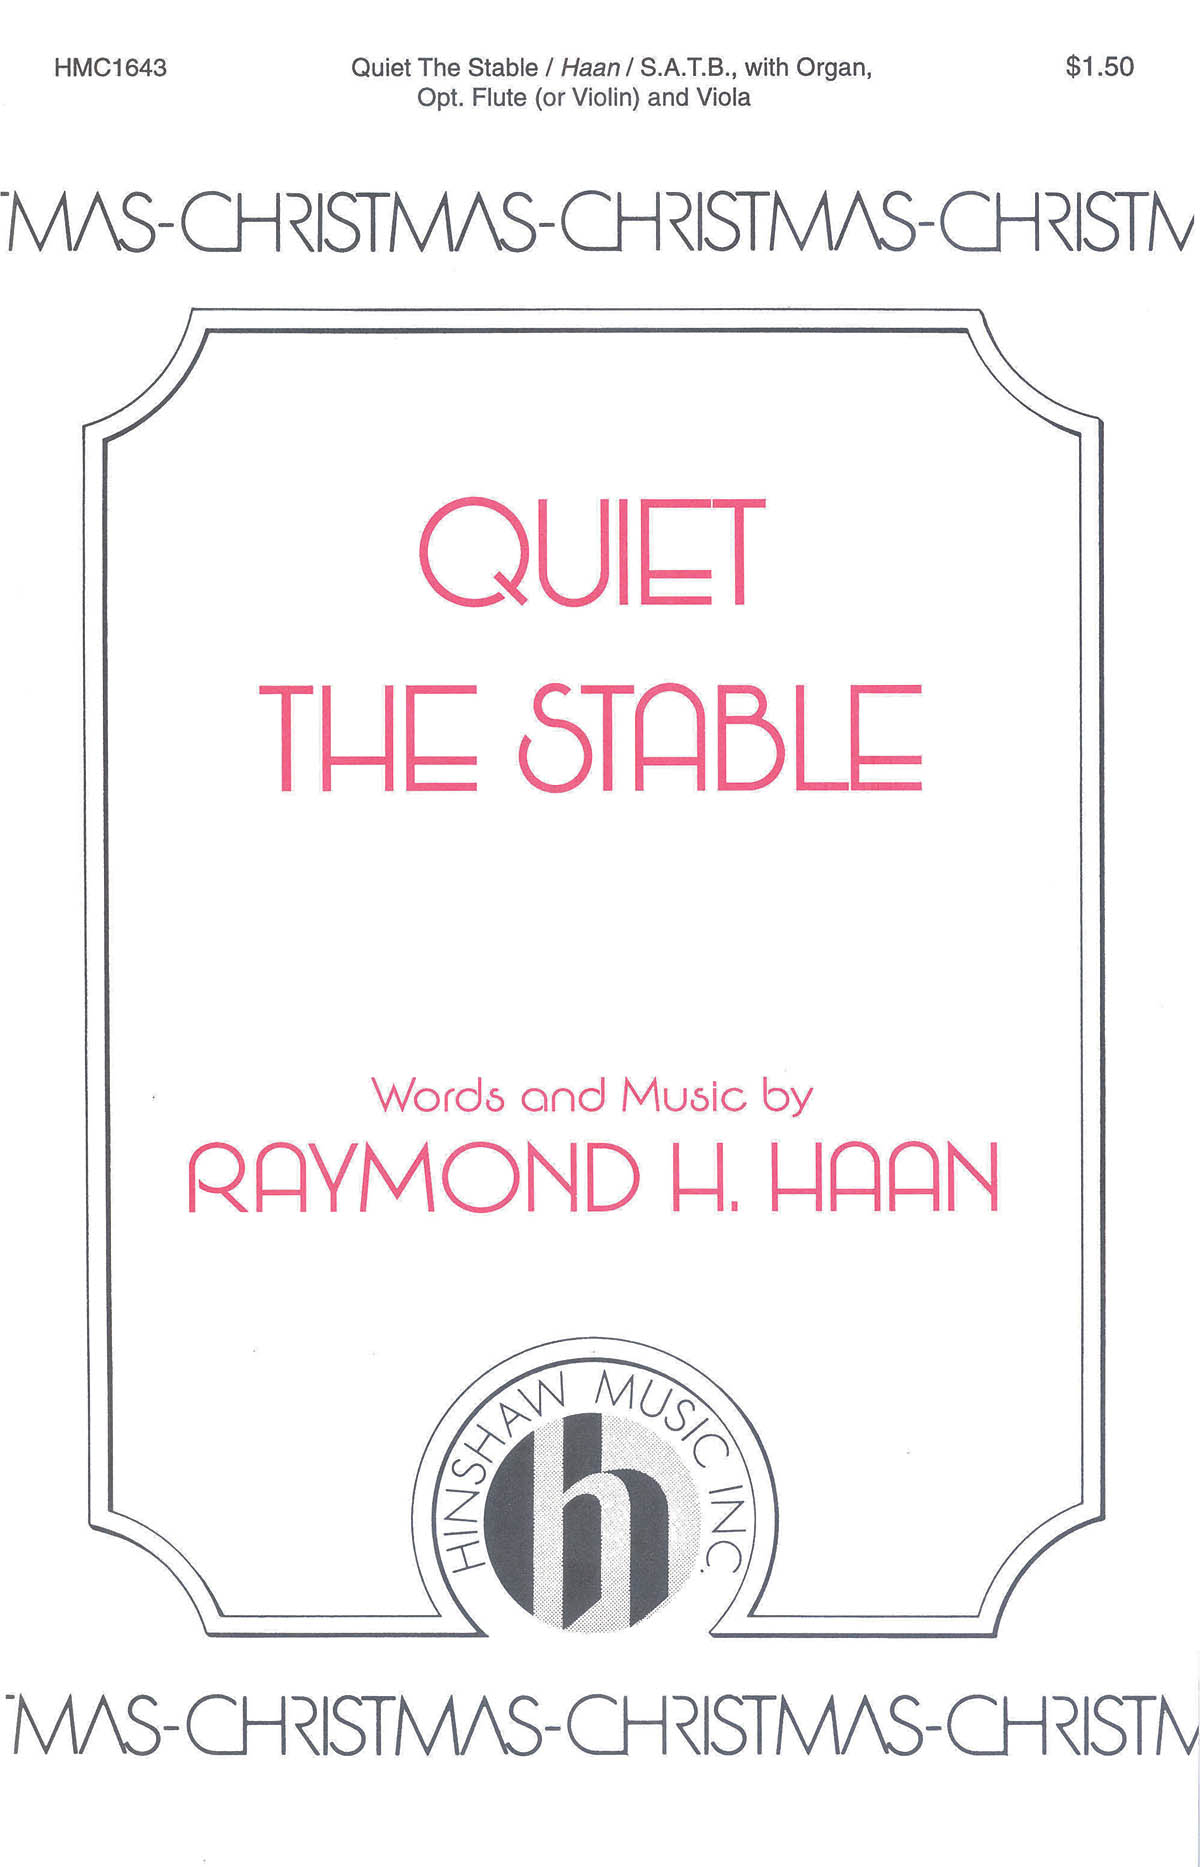 Raymond H. Haan: Quiet the Stable: SATB: Vocal Score